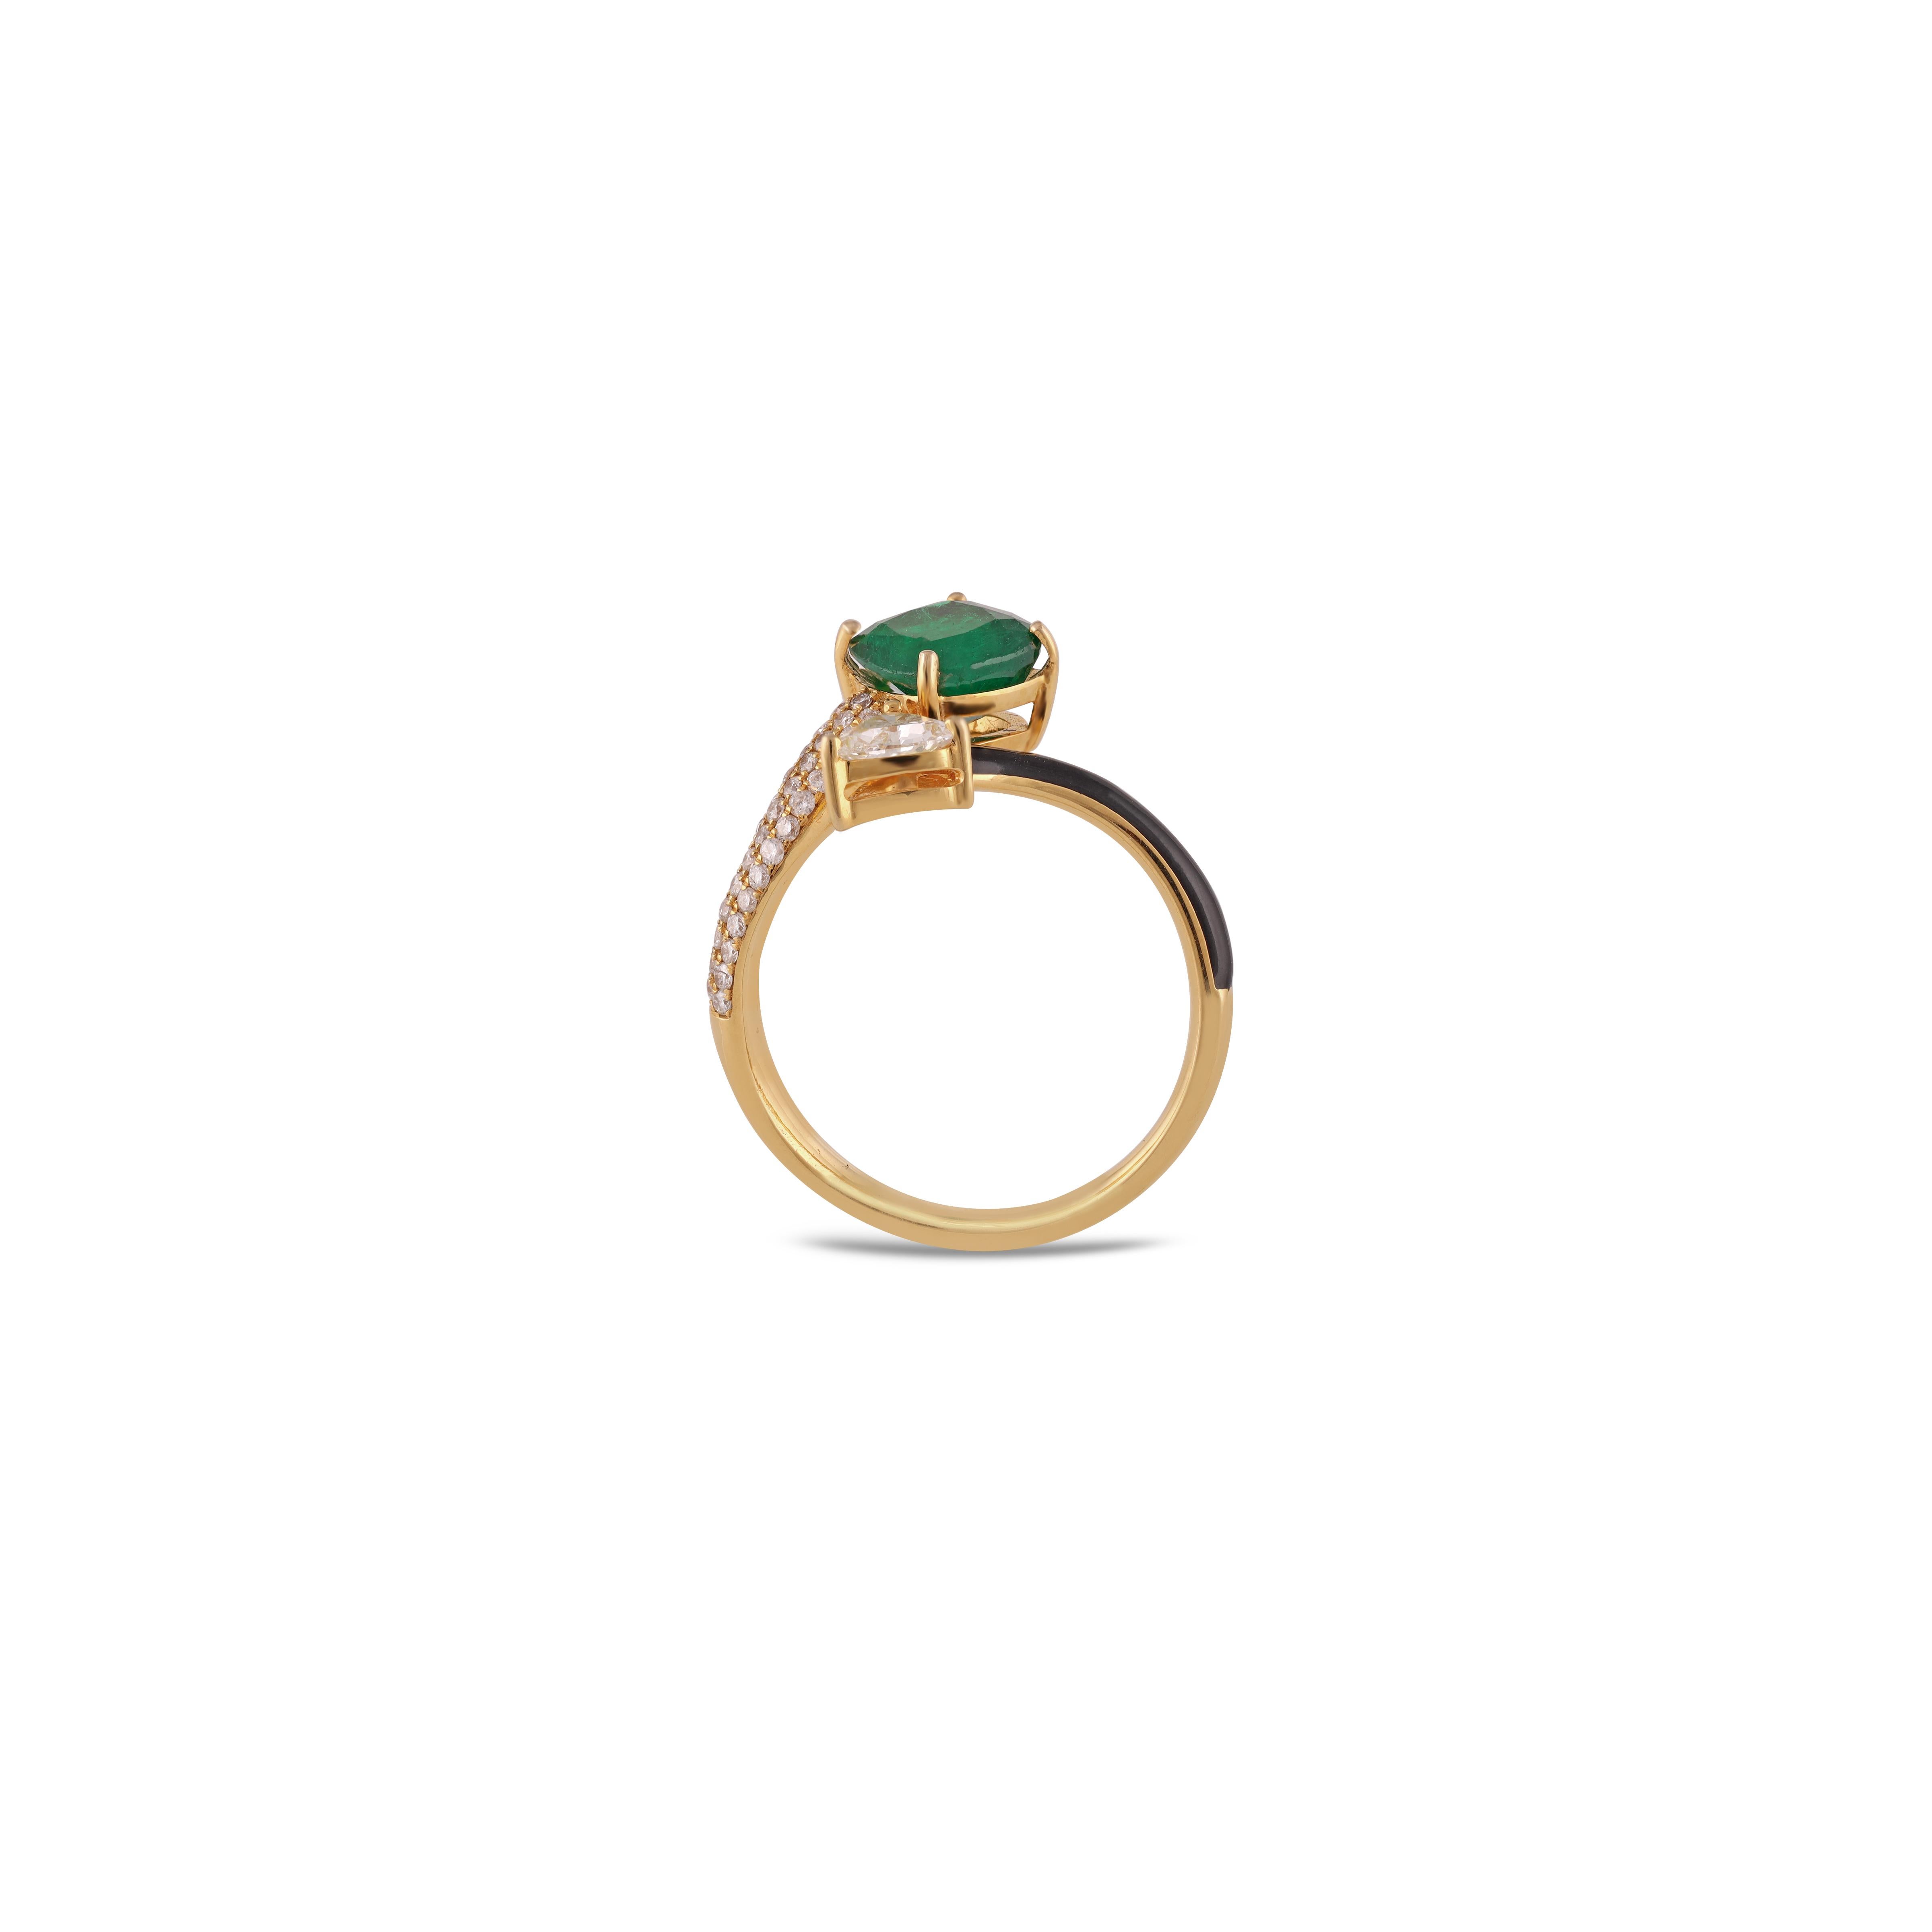 Contemporary 1.45 Carat Clear Zambian Emerald & Diamond Ring with Enamel & 18K Gold For Sale